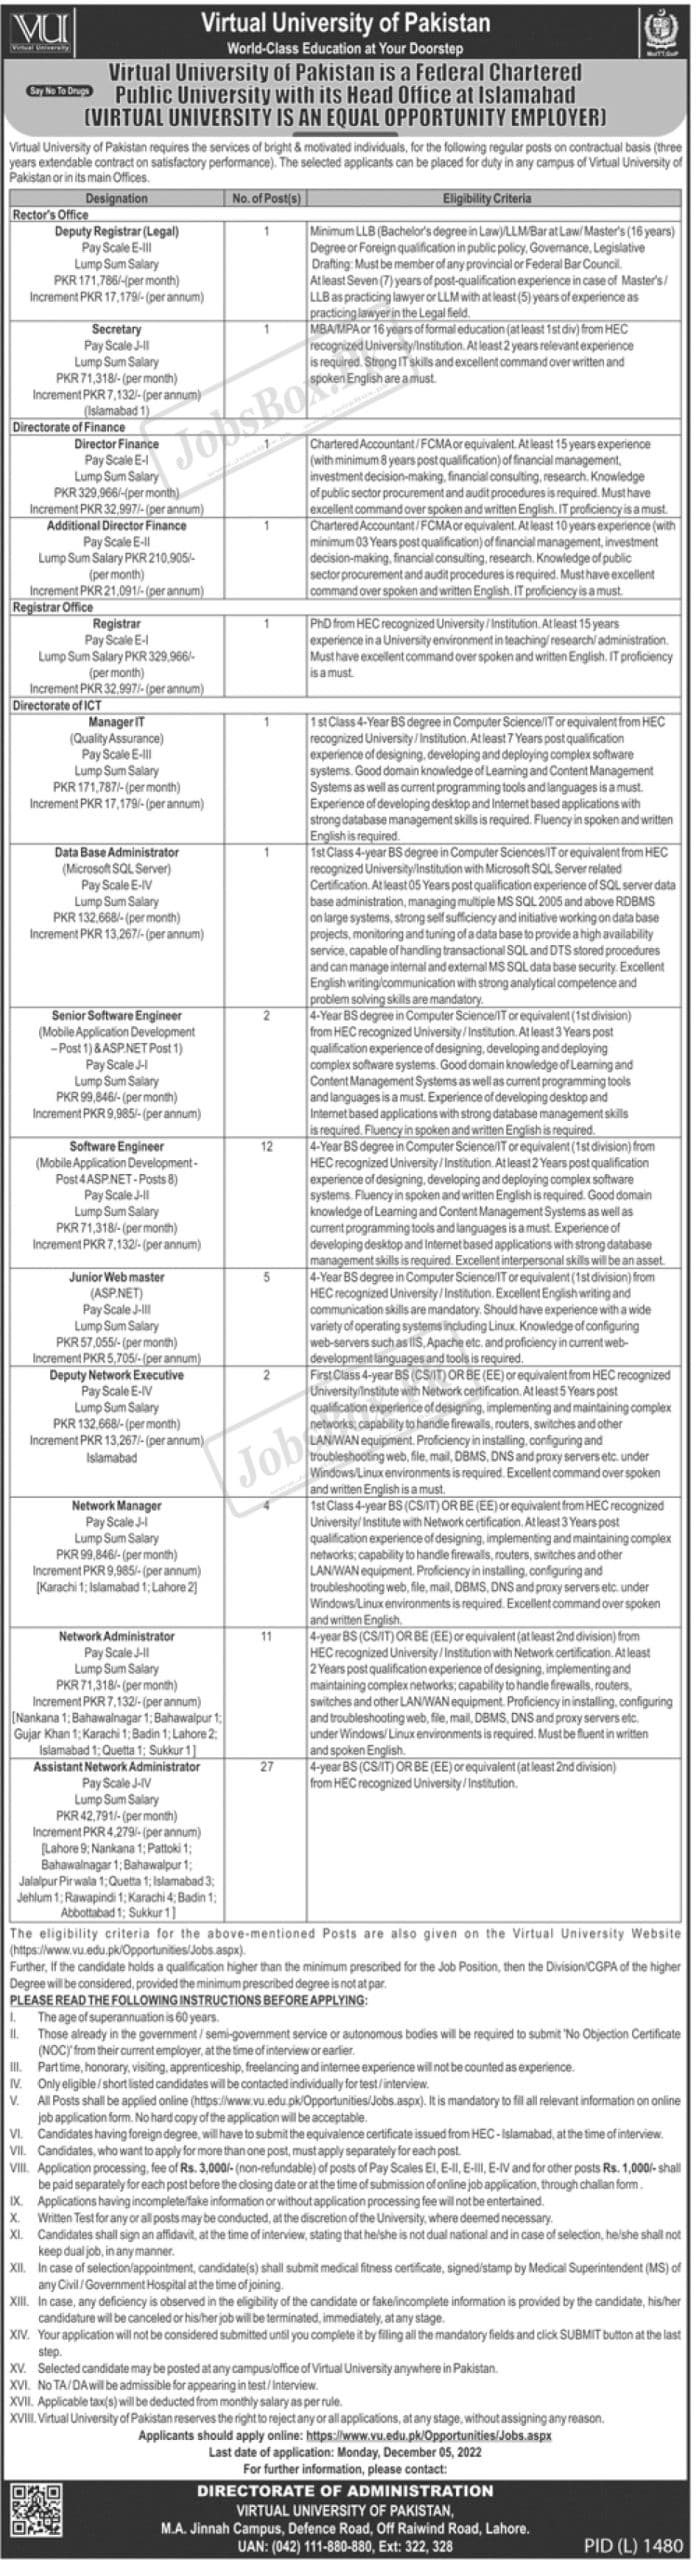 New Employment Opportunities at Virtual University of Pakistan